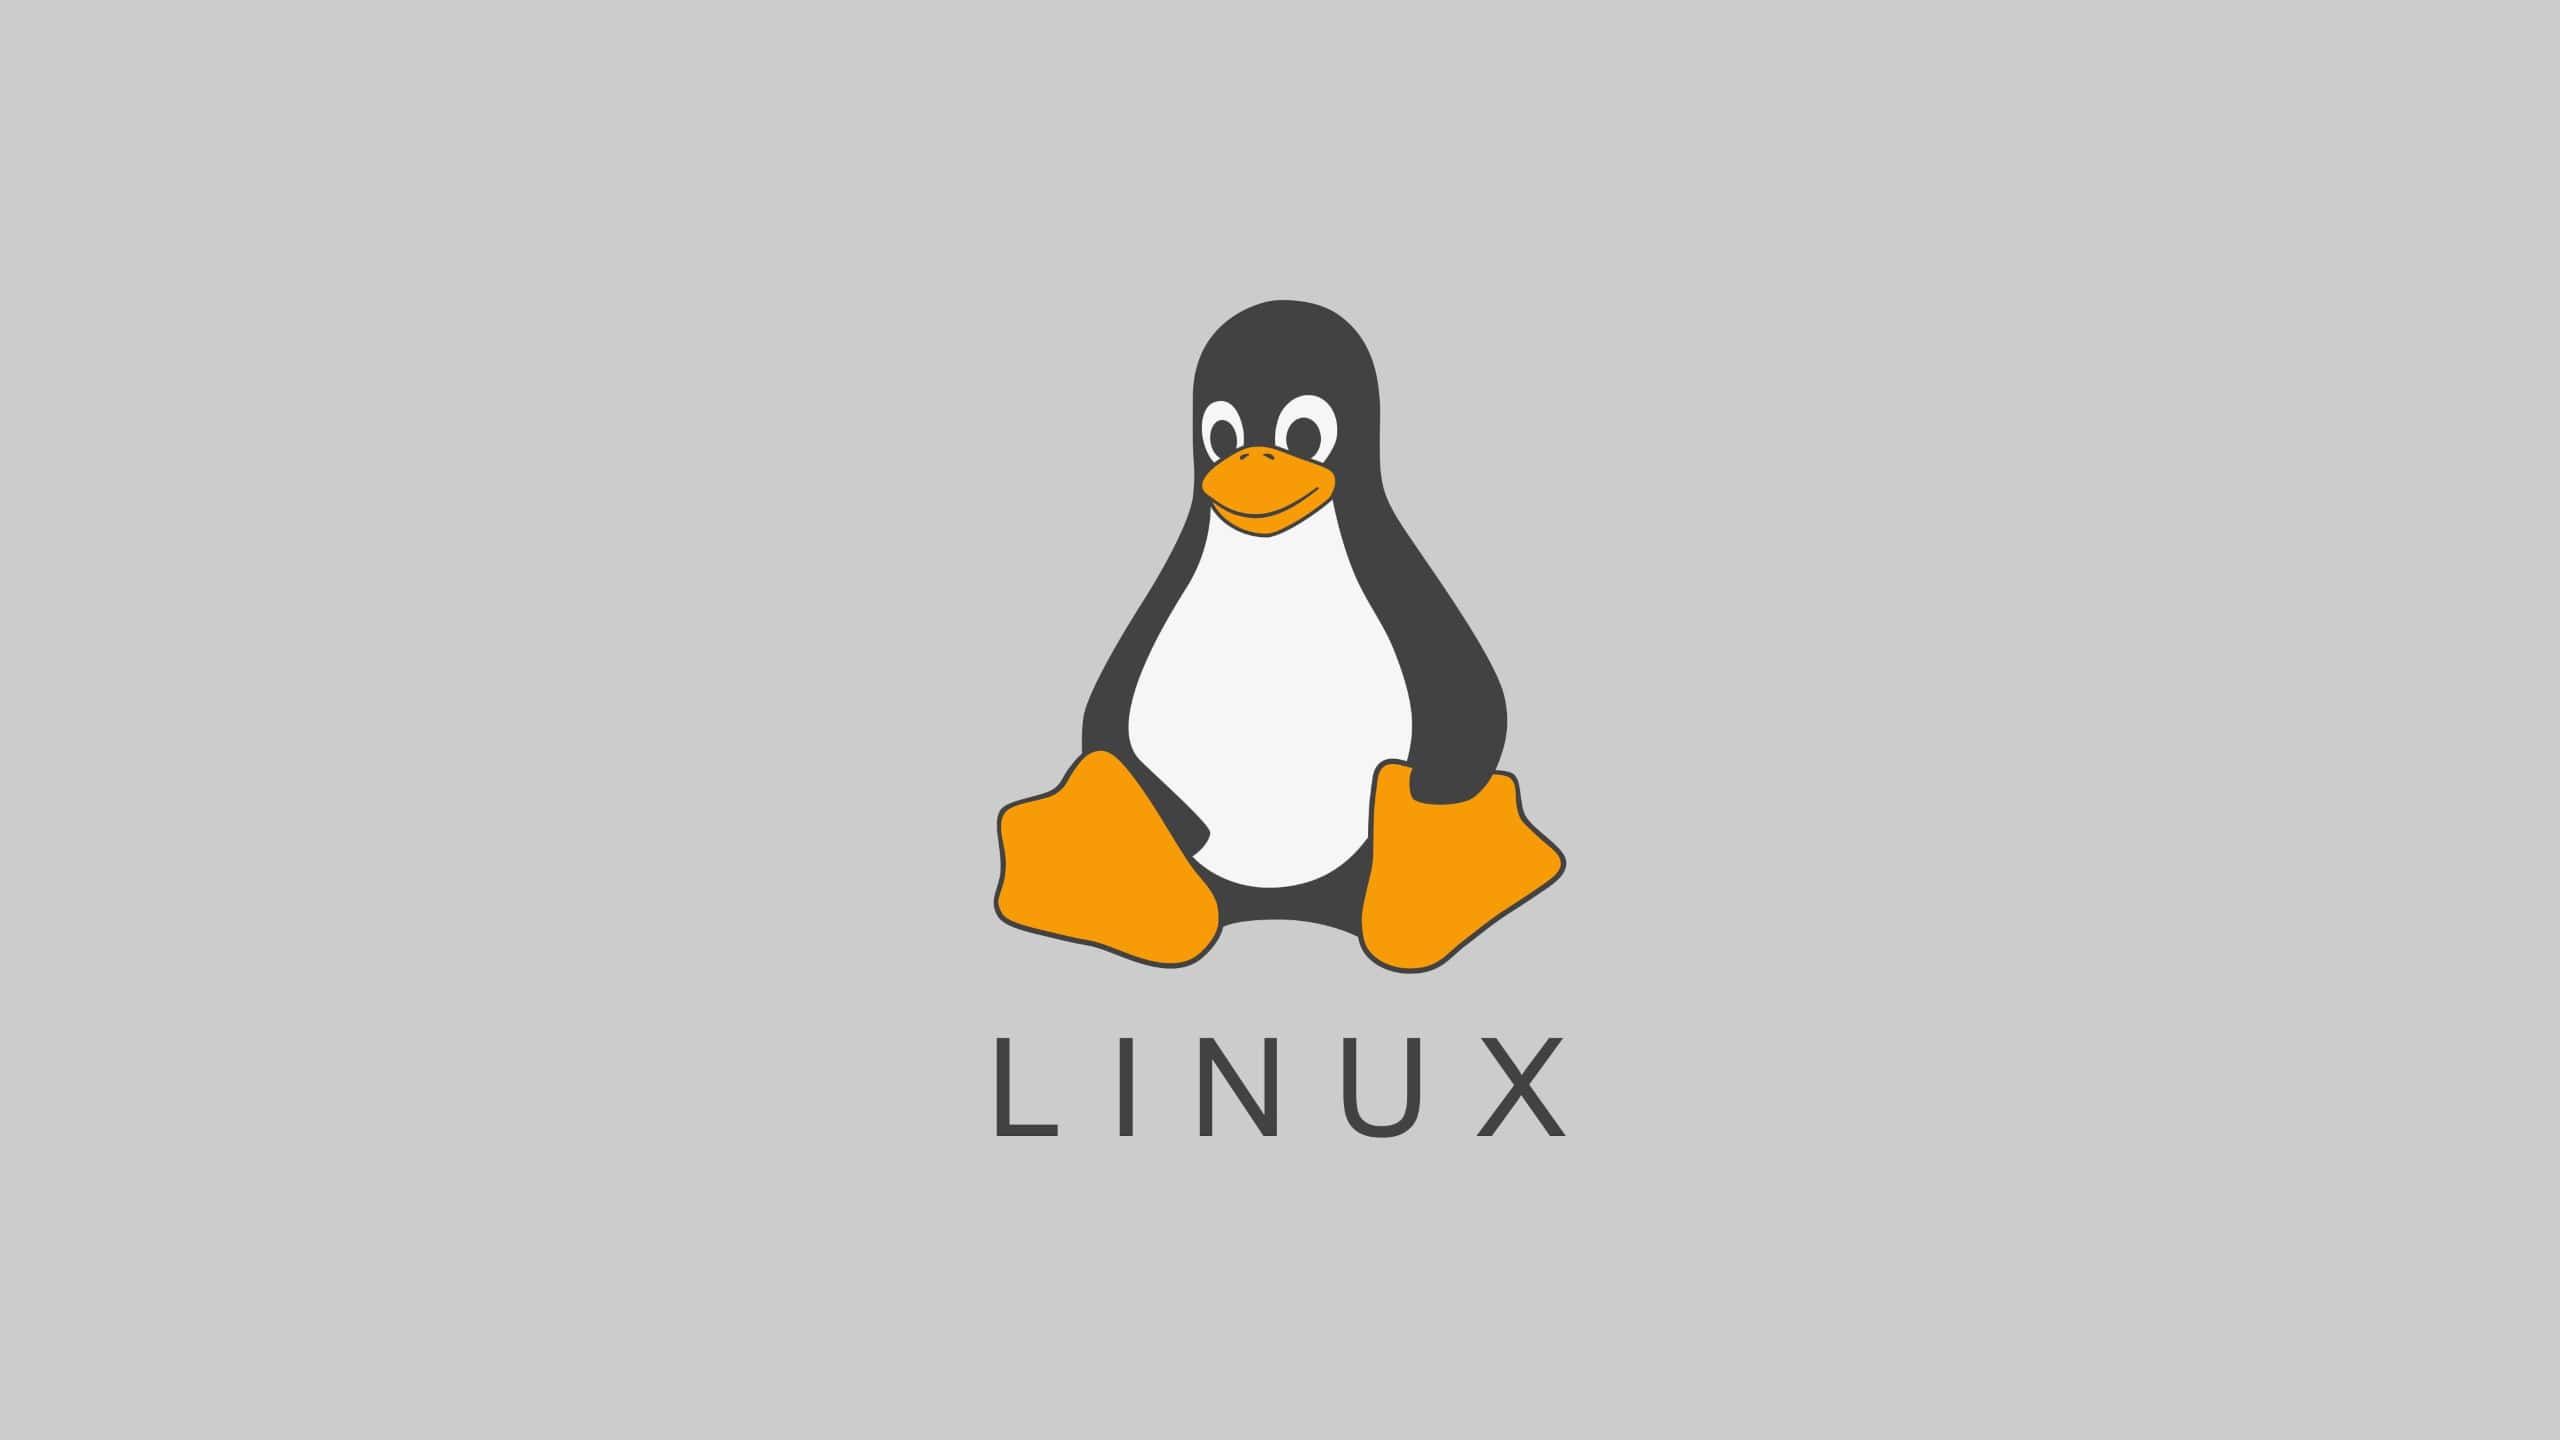 How to search files by extension in Linux?